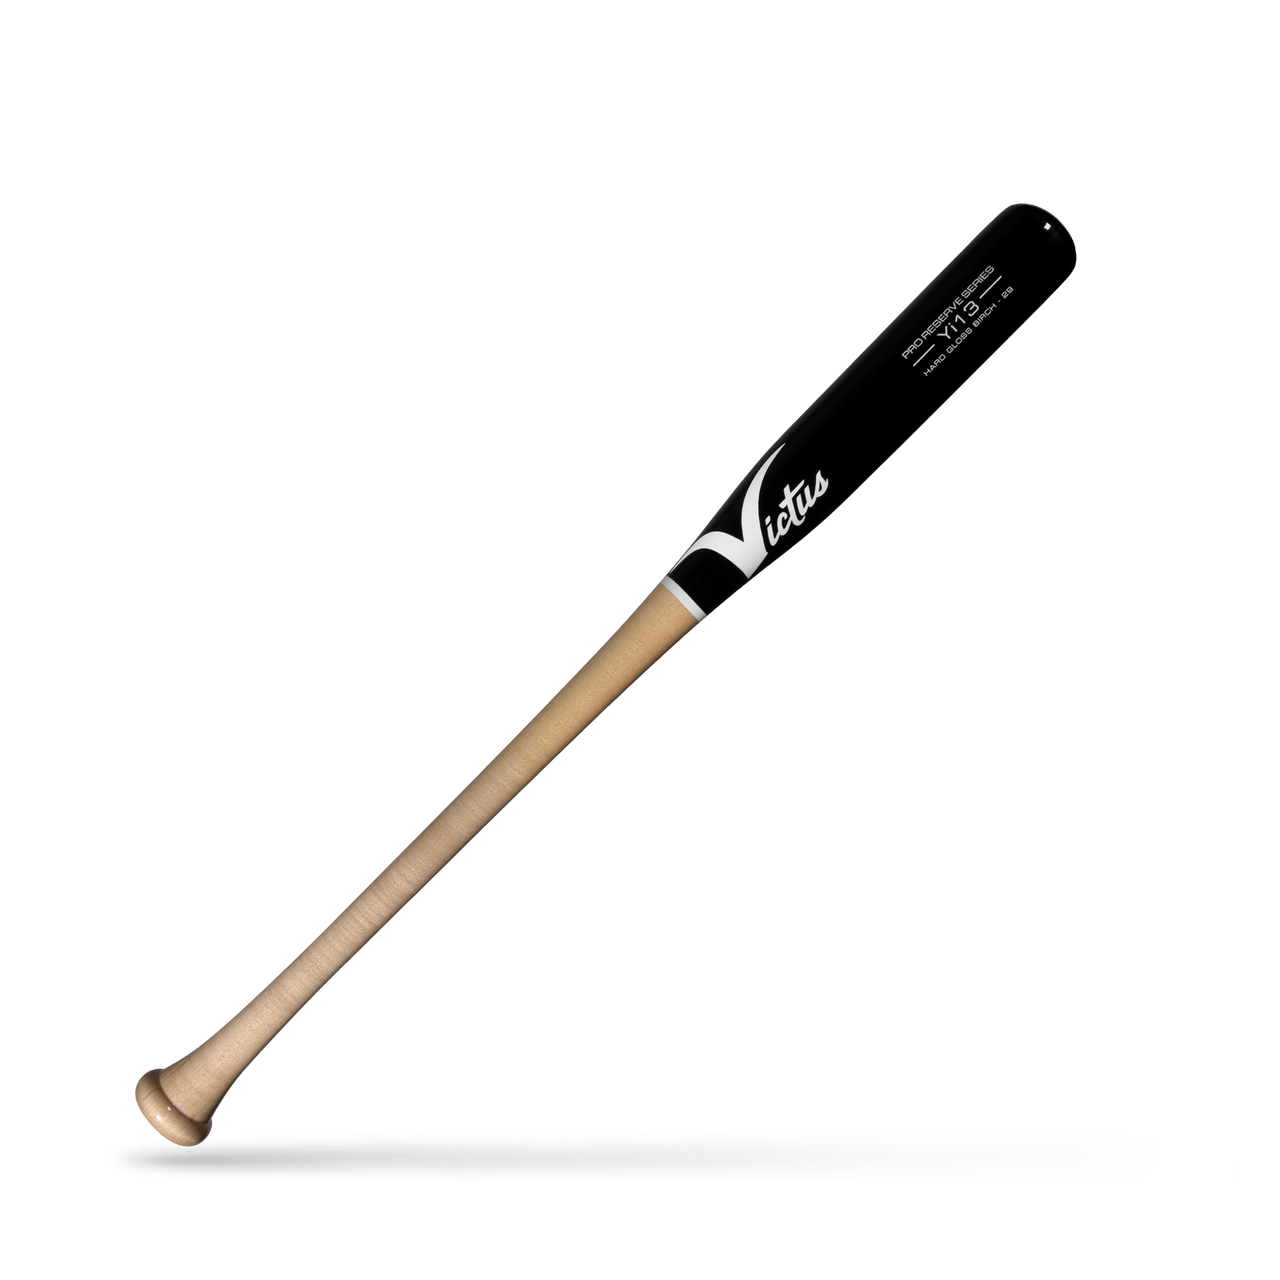 victus-pro-reserve-birch-yi13-youth-wood-baseball-bat-30-inch VYRWBYI13-NBK-30   <div class=productView-description> <h1 class=productView-title-lower>YI13 YOUTH BIRCH PRO RESERVE</h1> <p><span>Modeled after the